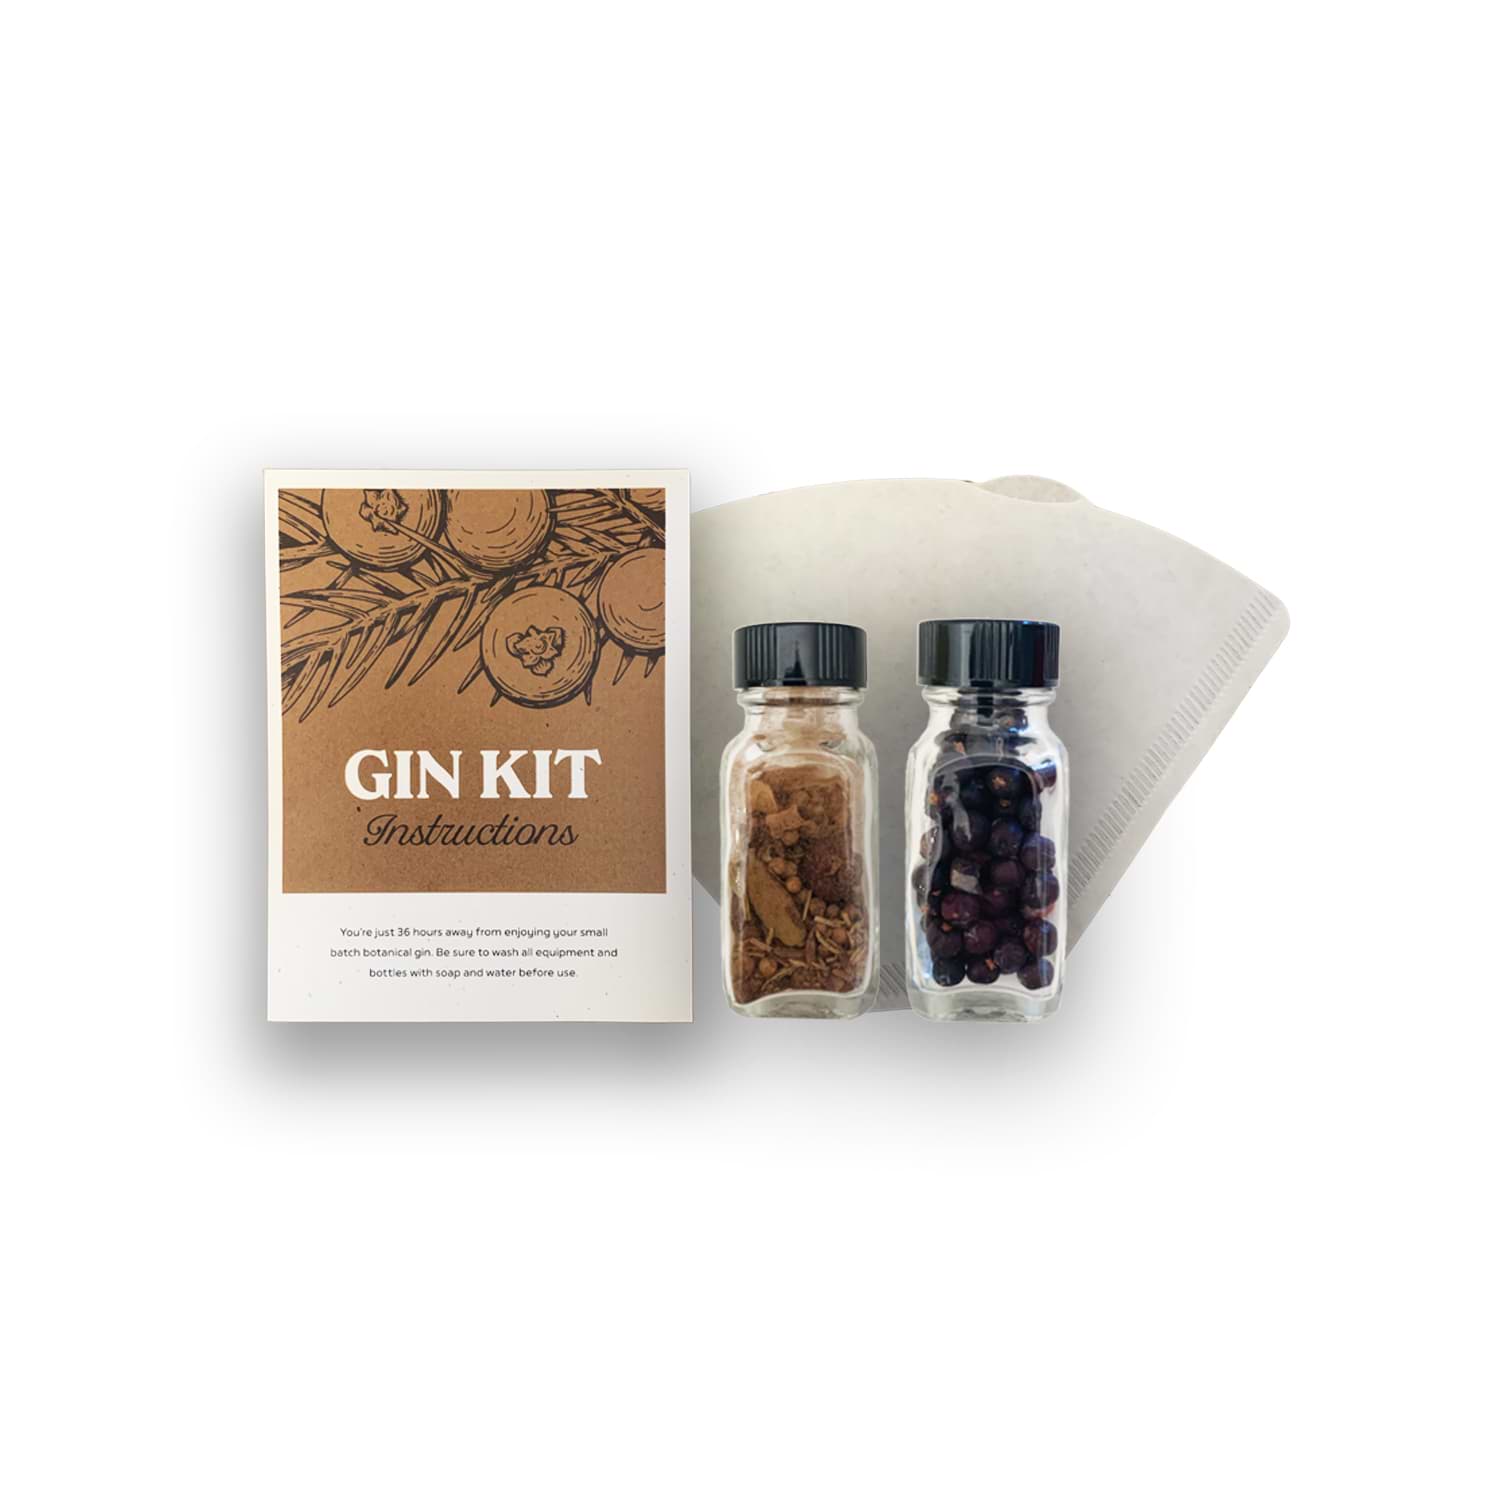  W&P Homemade Gin Kit, Make Your Own Kit, Botanical Blend and  Juniper Berries, Home Kit, Kitchen Essentials, DIY : Home & Kitchen